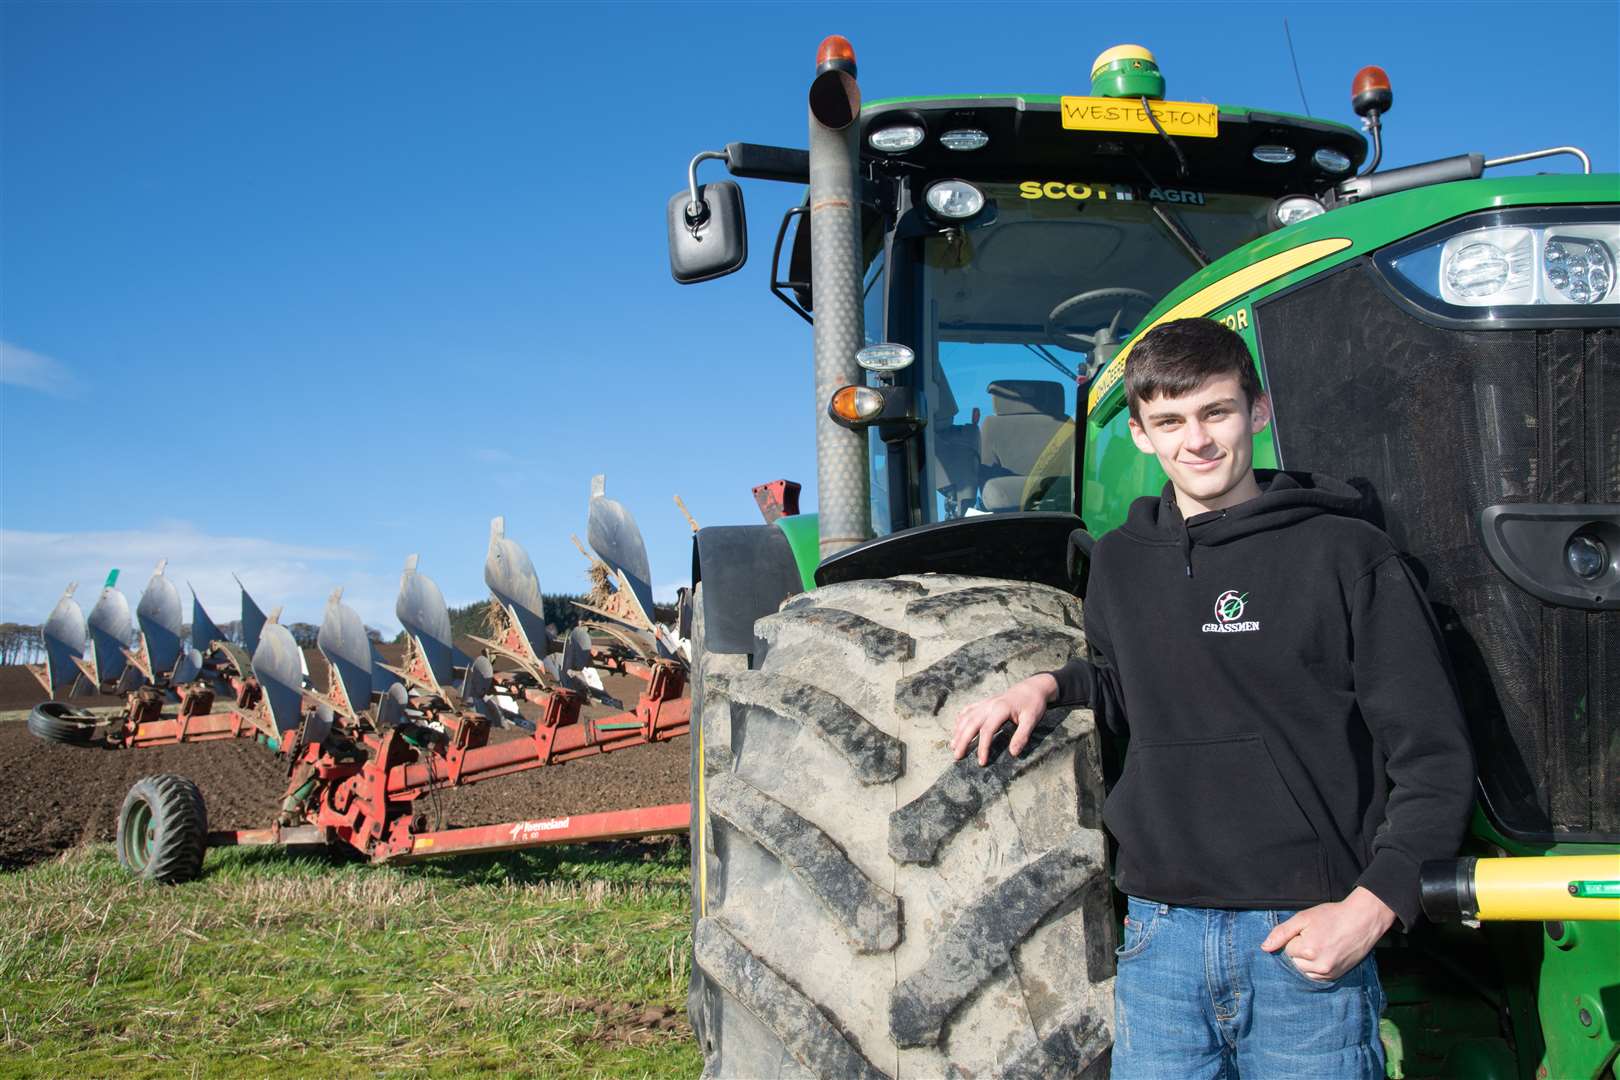 15-year-old Mark Paterson alongside the John Deere tractor he uses to plough at the family's Westerton farm. ..Picture: Daniel Forsyth..